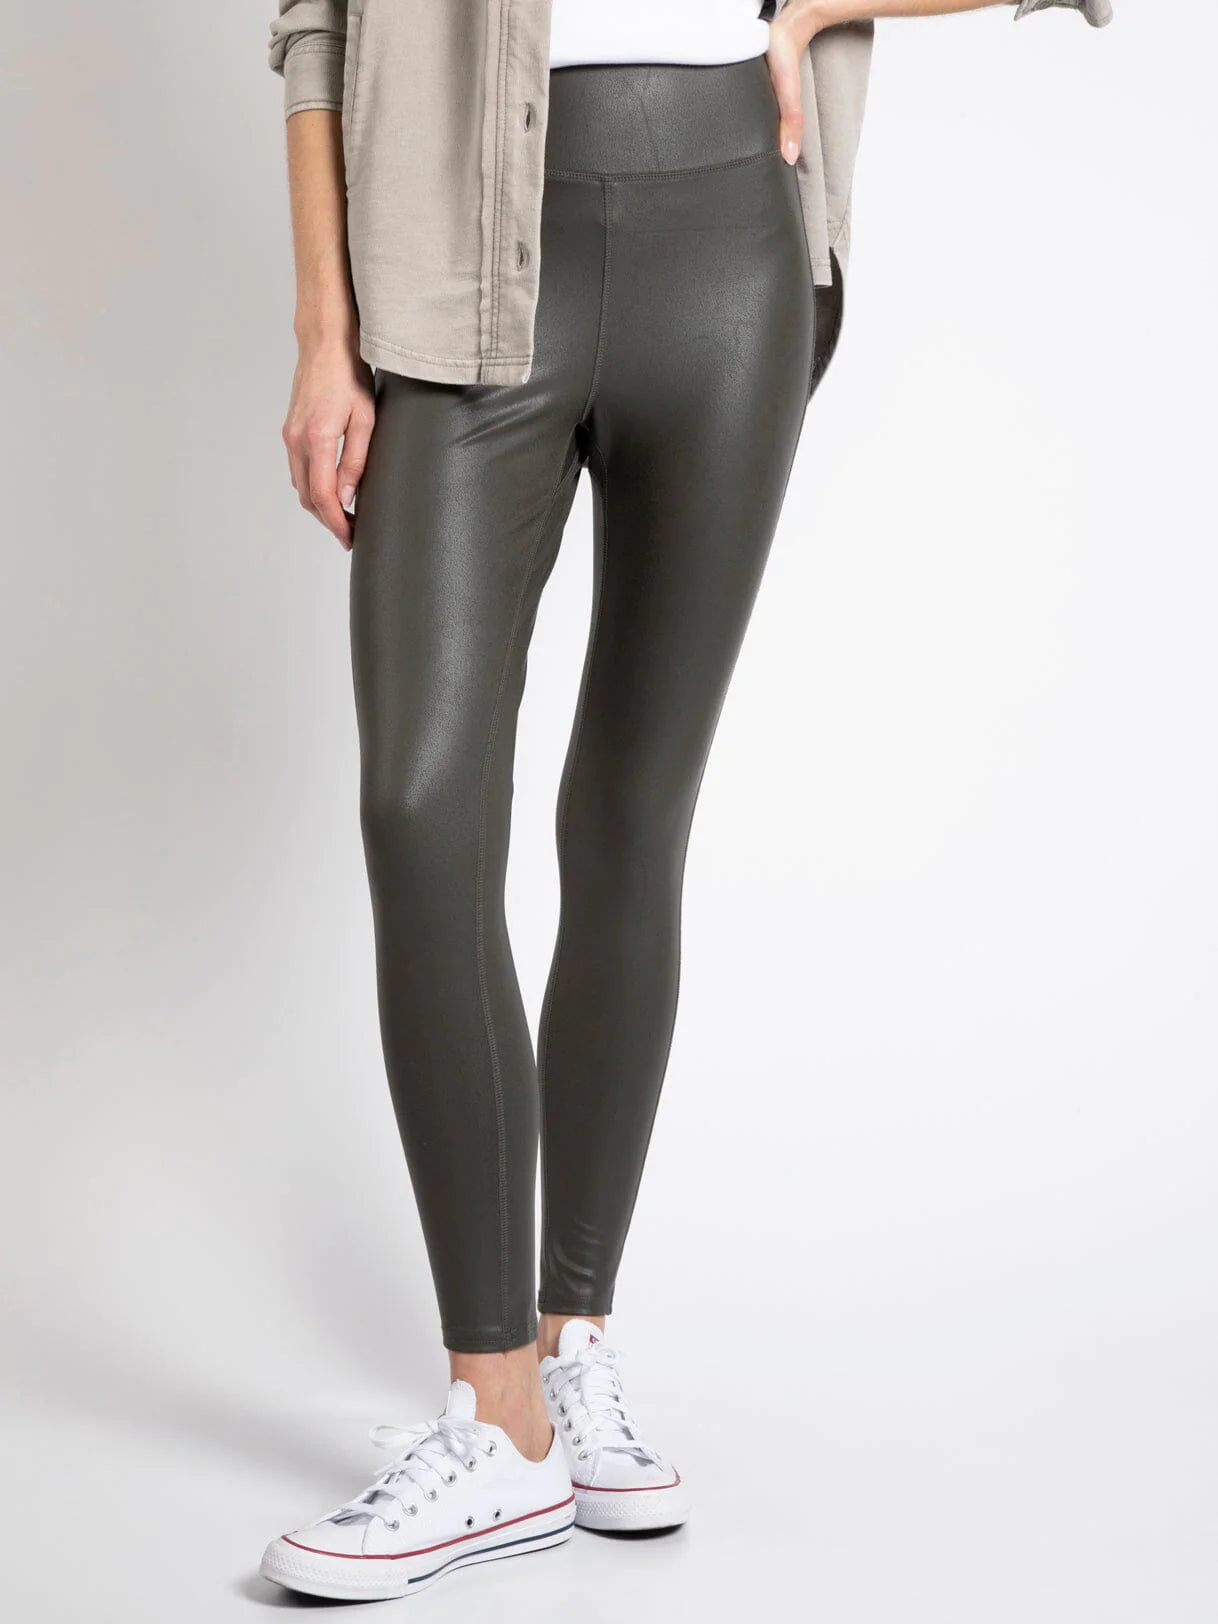 Faux Leather Leggings - Olive